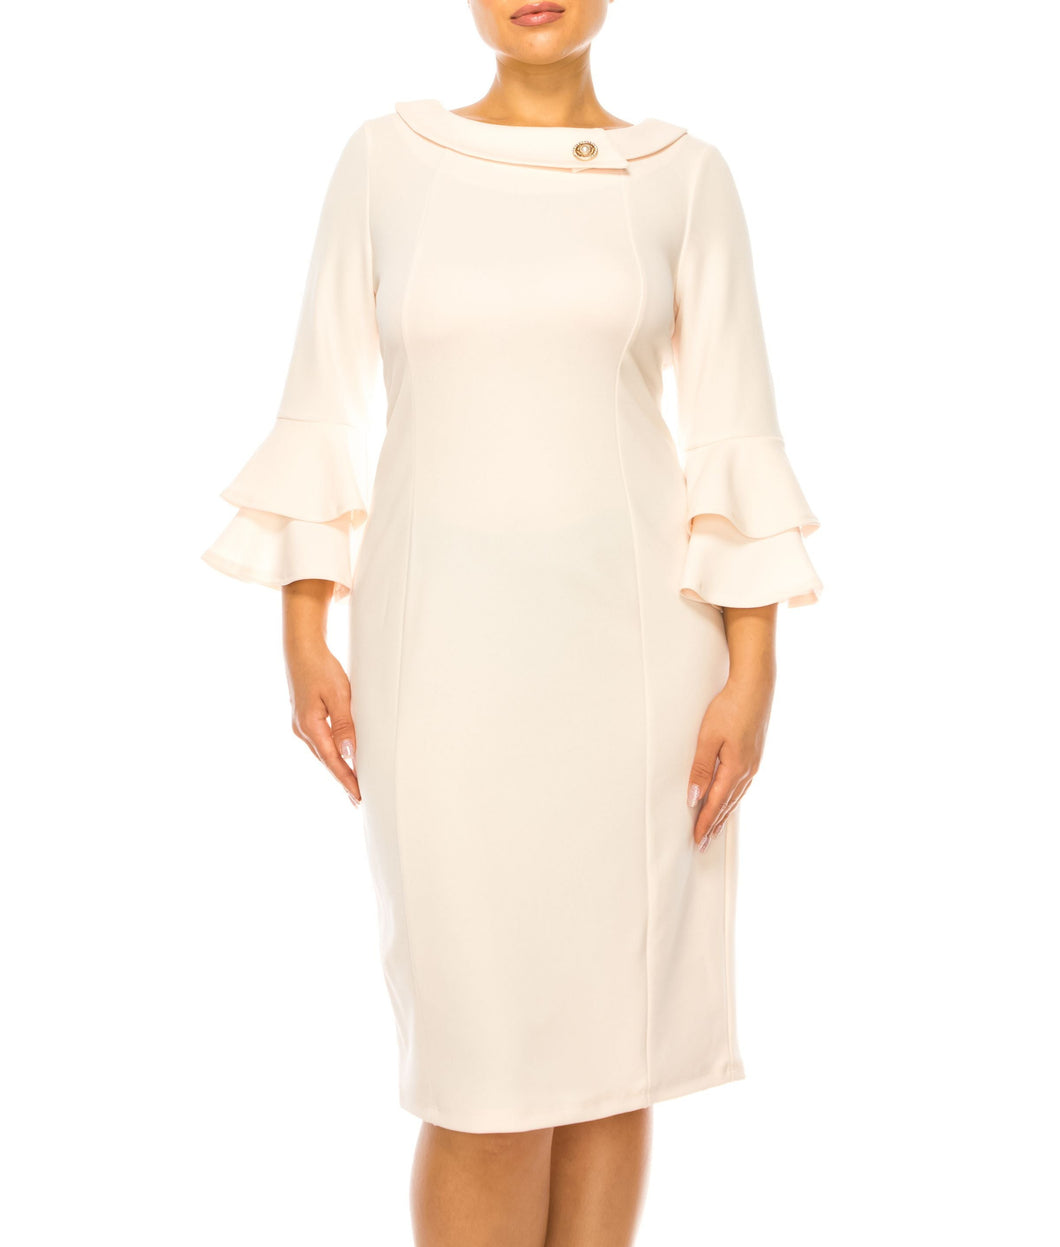 Last One! Size 16 - Jessica Rose, Peach Collared & Bell Sleeve Day Dress  Women's Mother of the Bride, Modest Apparel